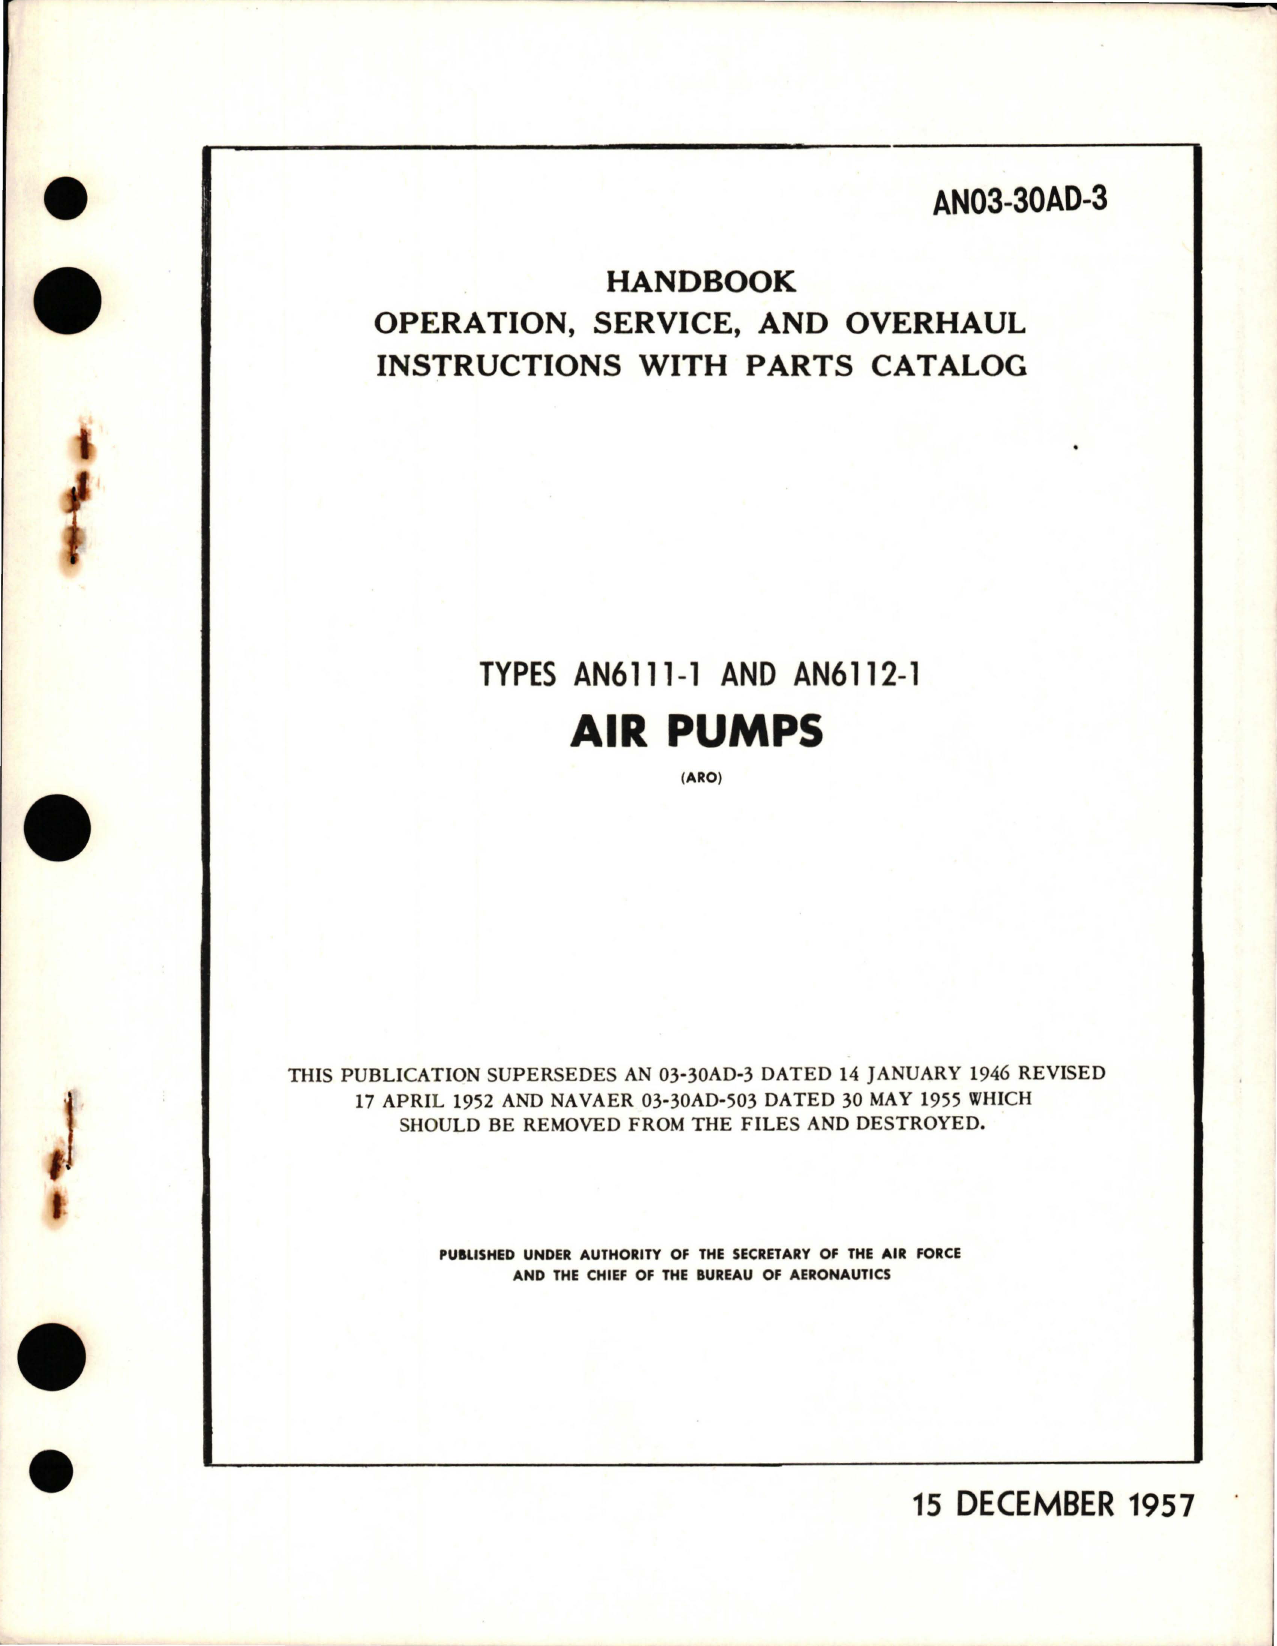 Sample page 1 from AirCorps Library document: Operation, Service and Overhaul Instructions with Parts Catalog for Air Pumps - Types AN6111-1 and AN6112-1 